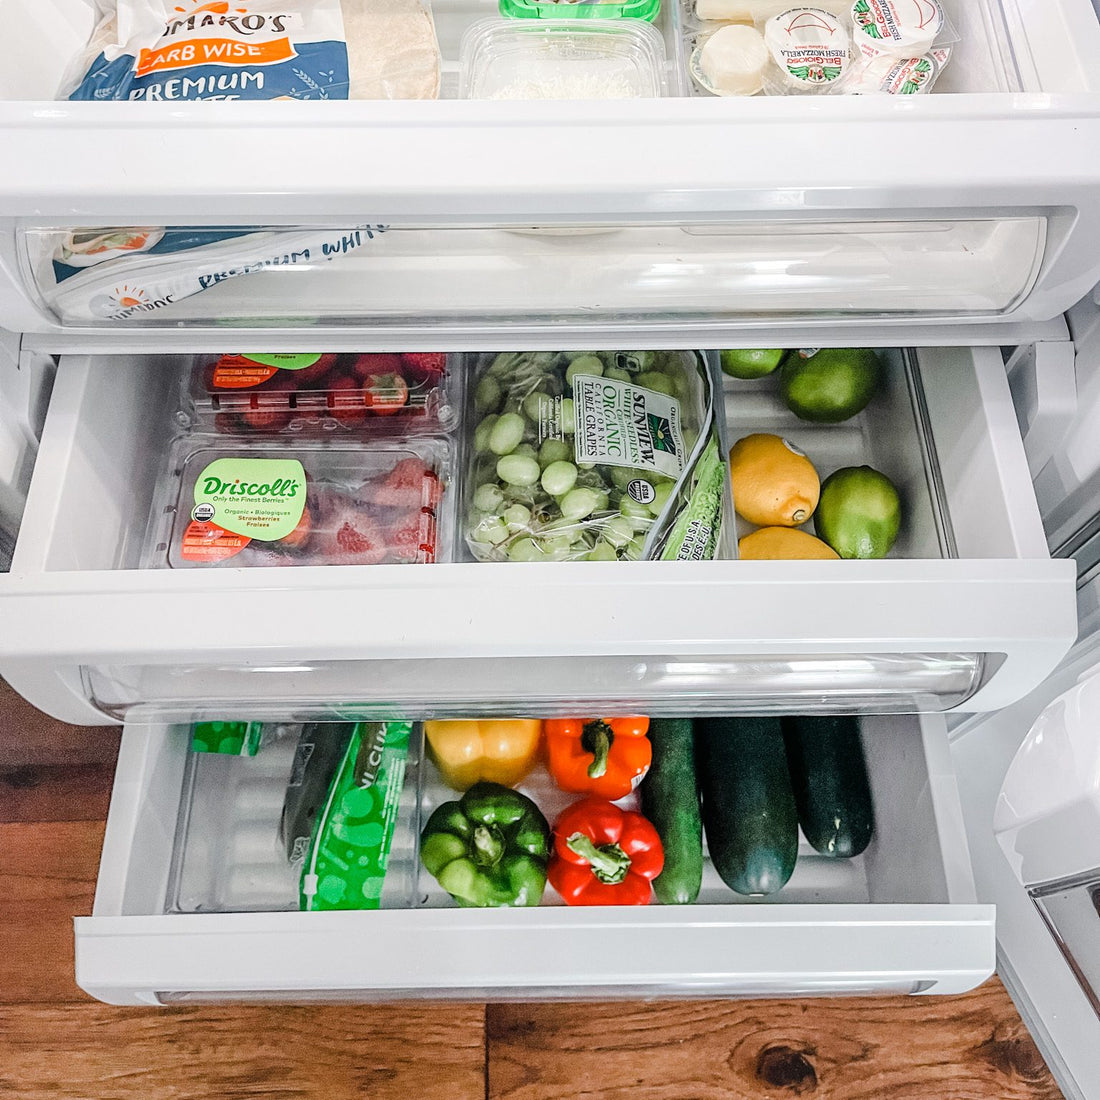 How to Organize a Refrigerator – So it Functions for your Home